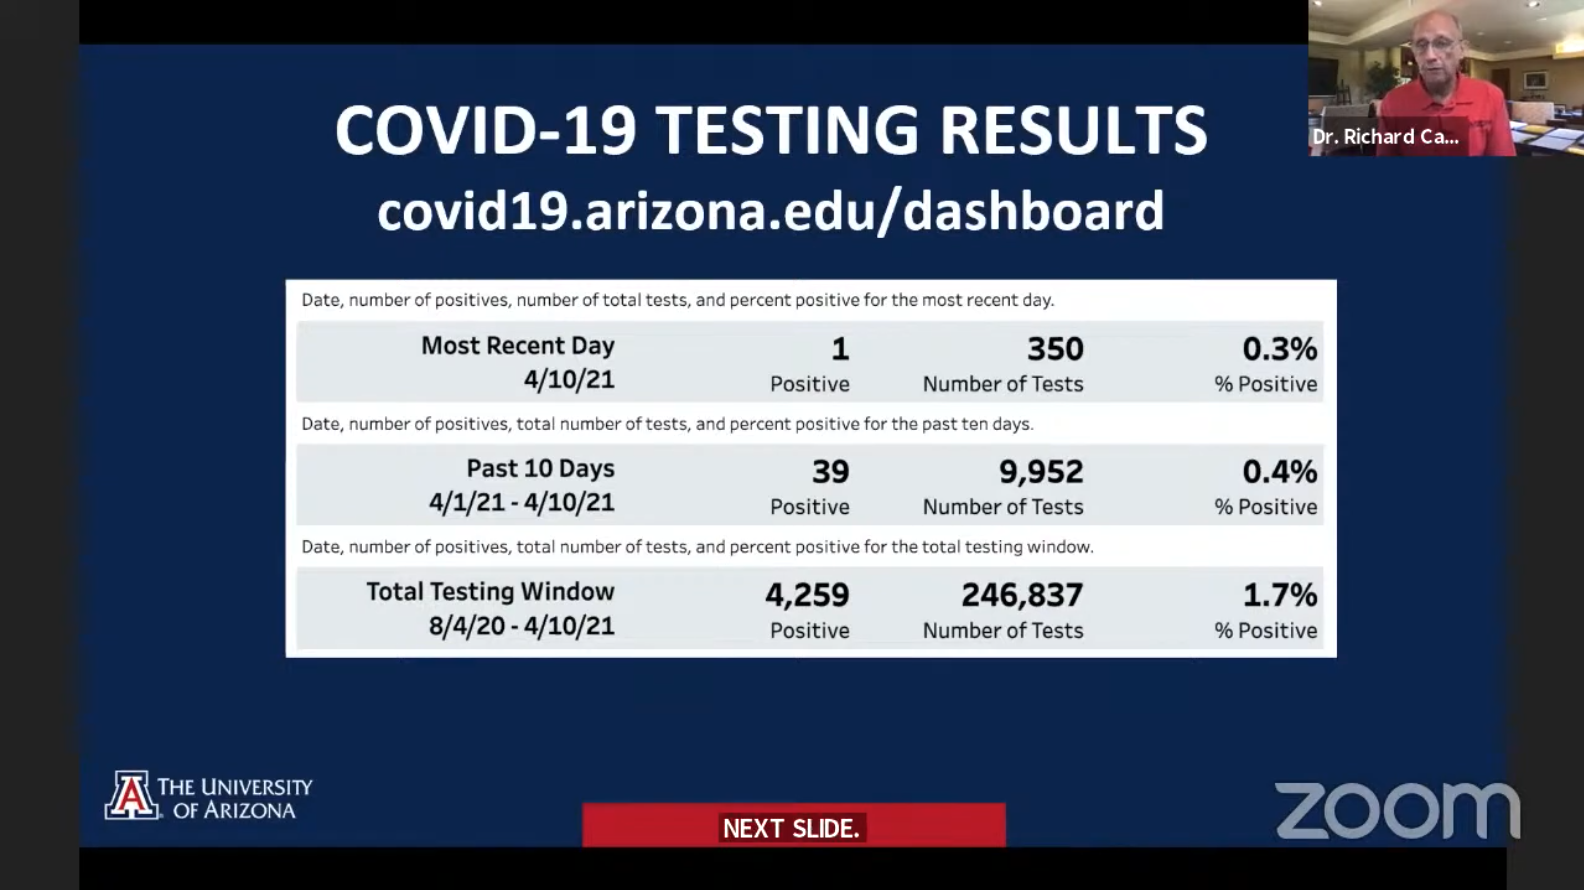 Screenshot of COVID-19 testing results from the university, reflecting a 0.4% positivity rate in the past week.